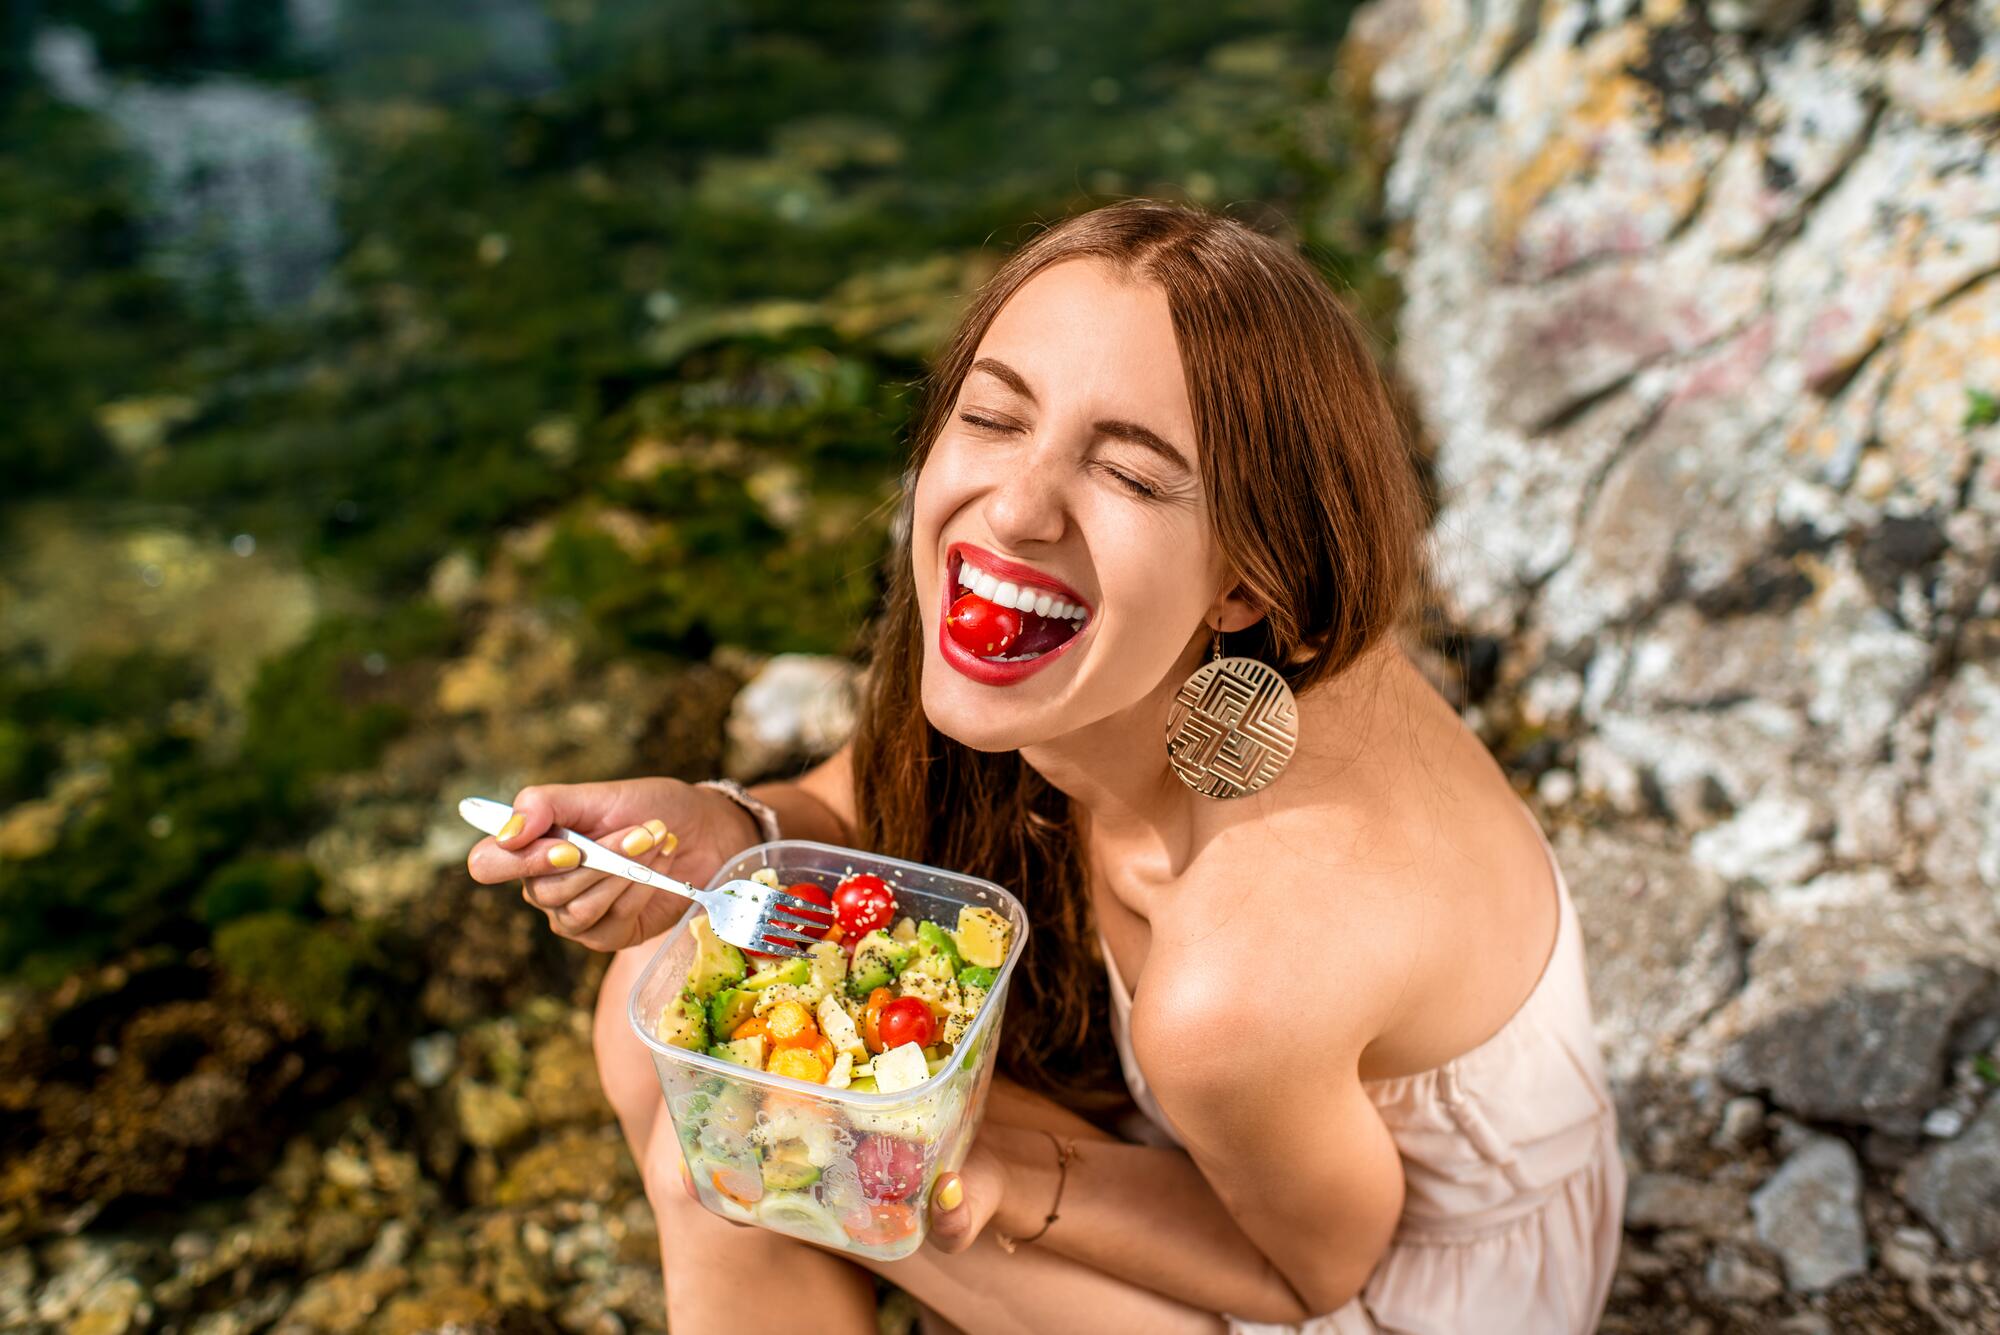 OC_YOUNG_GIRL_EATING_SMILING_HEALTHY_SHUTTERSTOCK_291921743